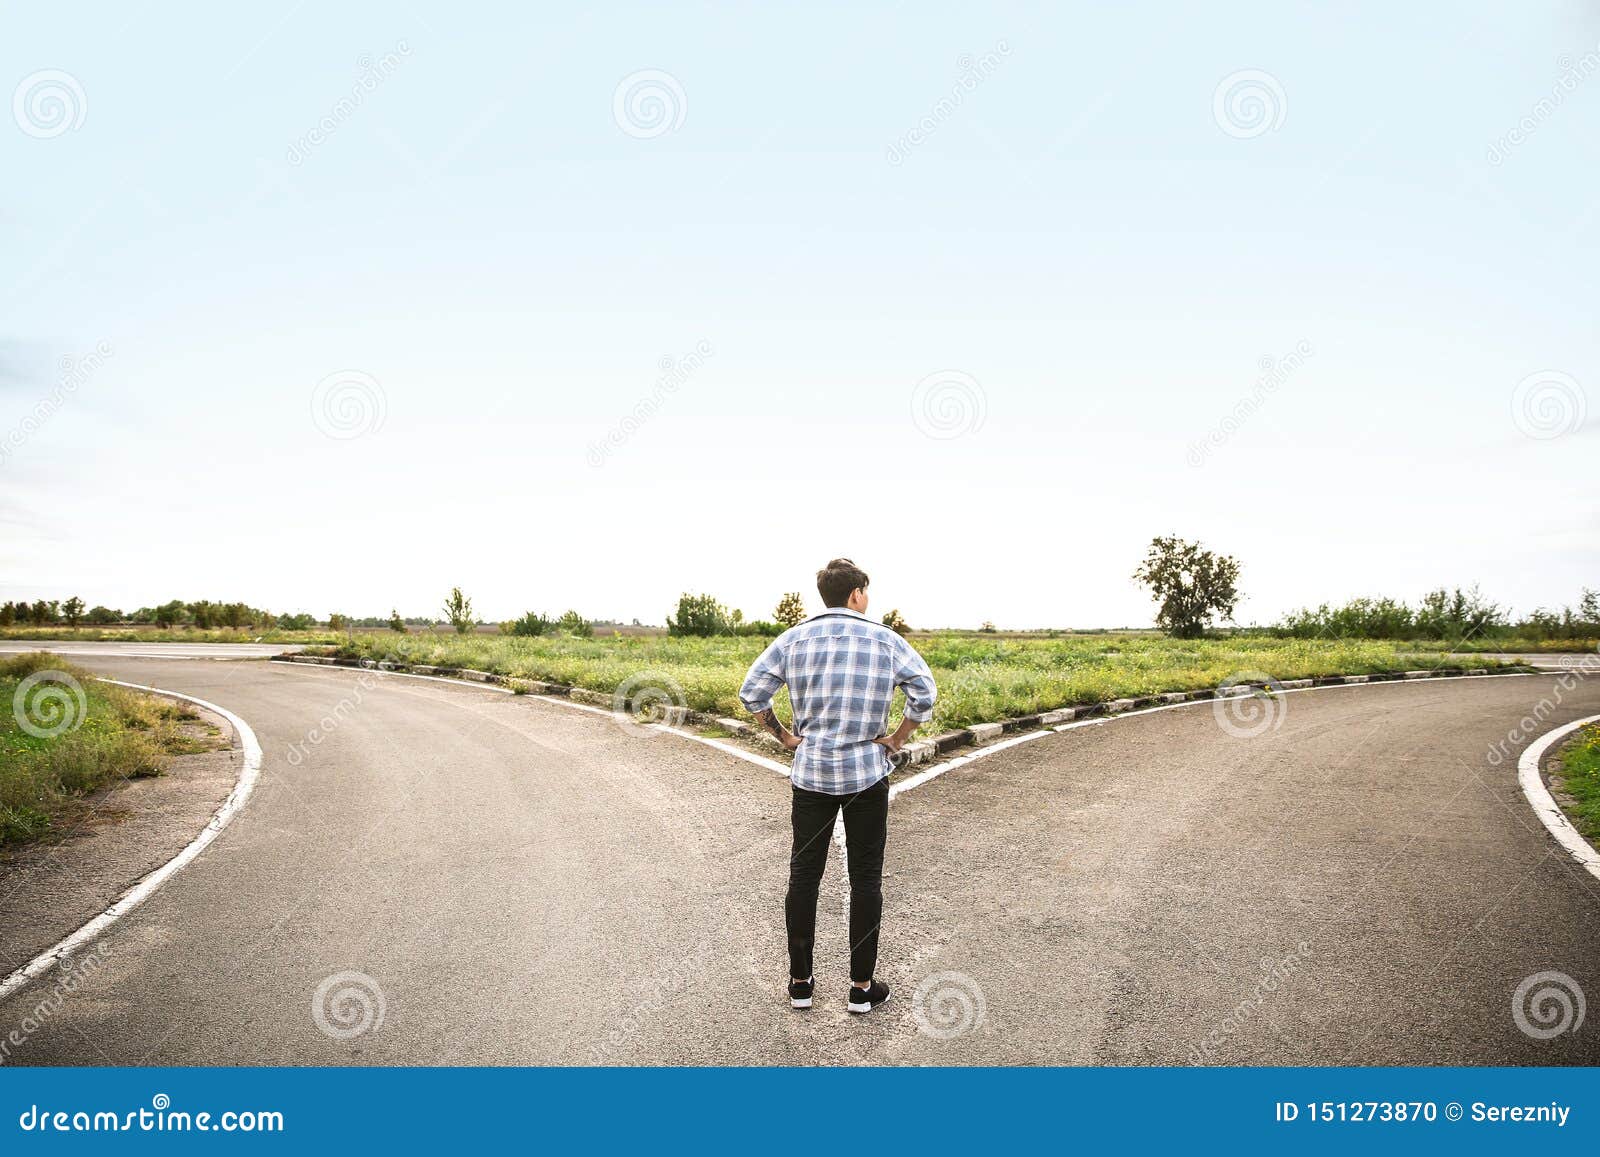 young man standing at crossroads. concept of choice